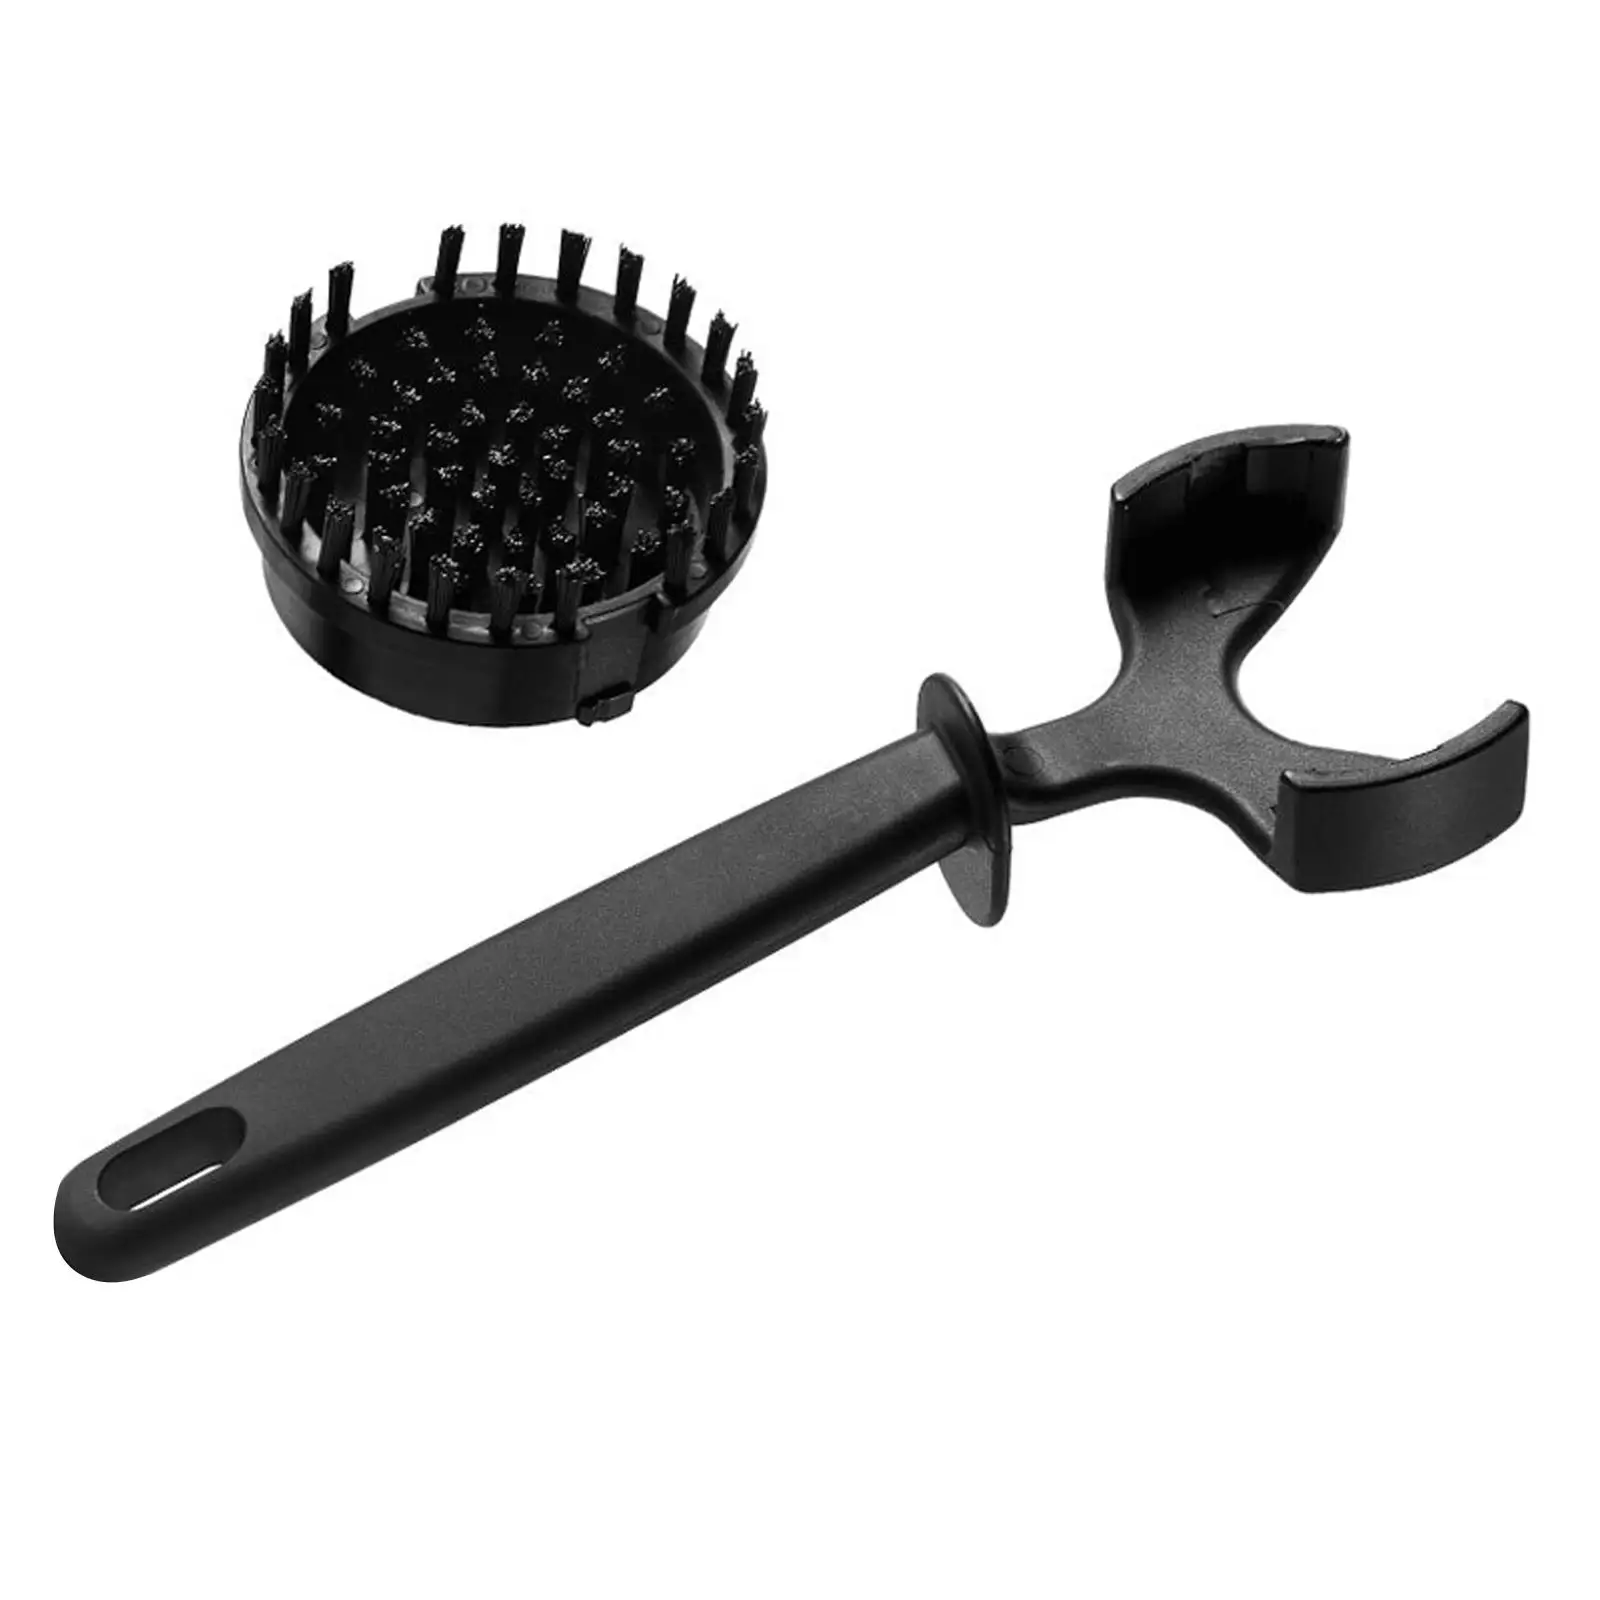 Coffee Grinder Brush for 58mm Brewing Head Coffee Maker Espresso Accessories